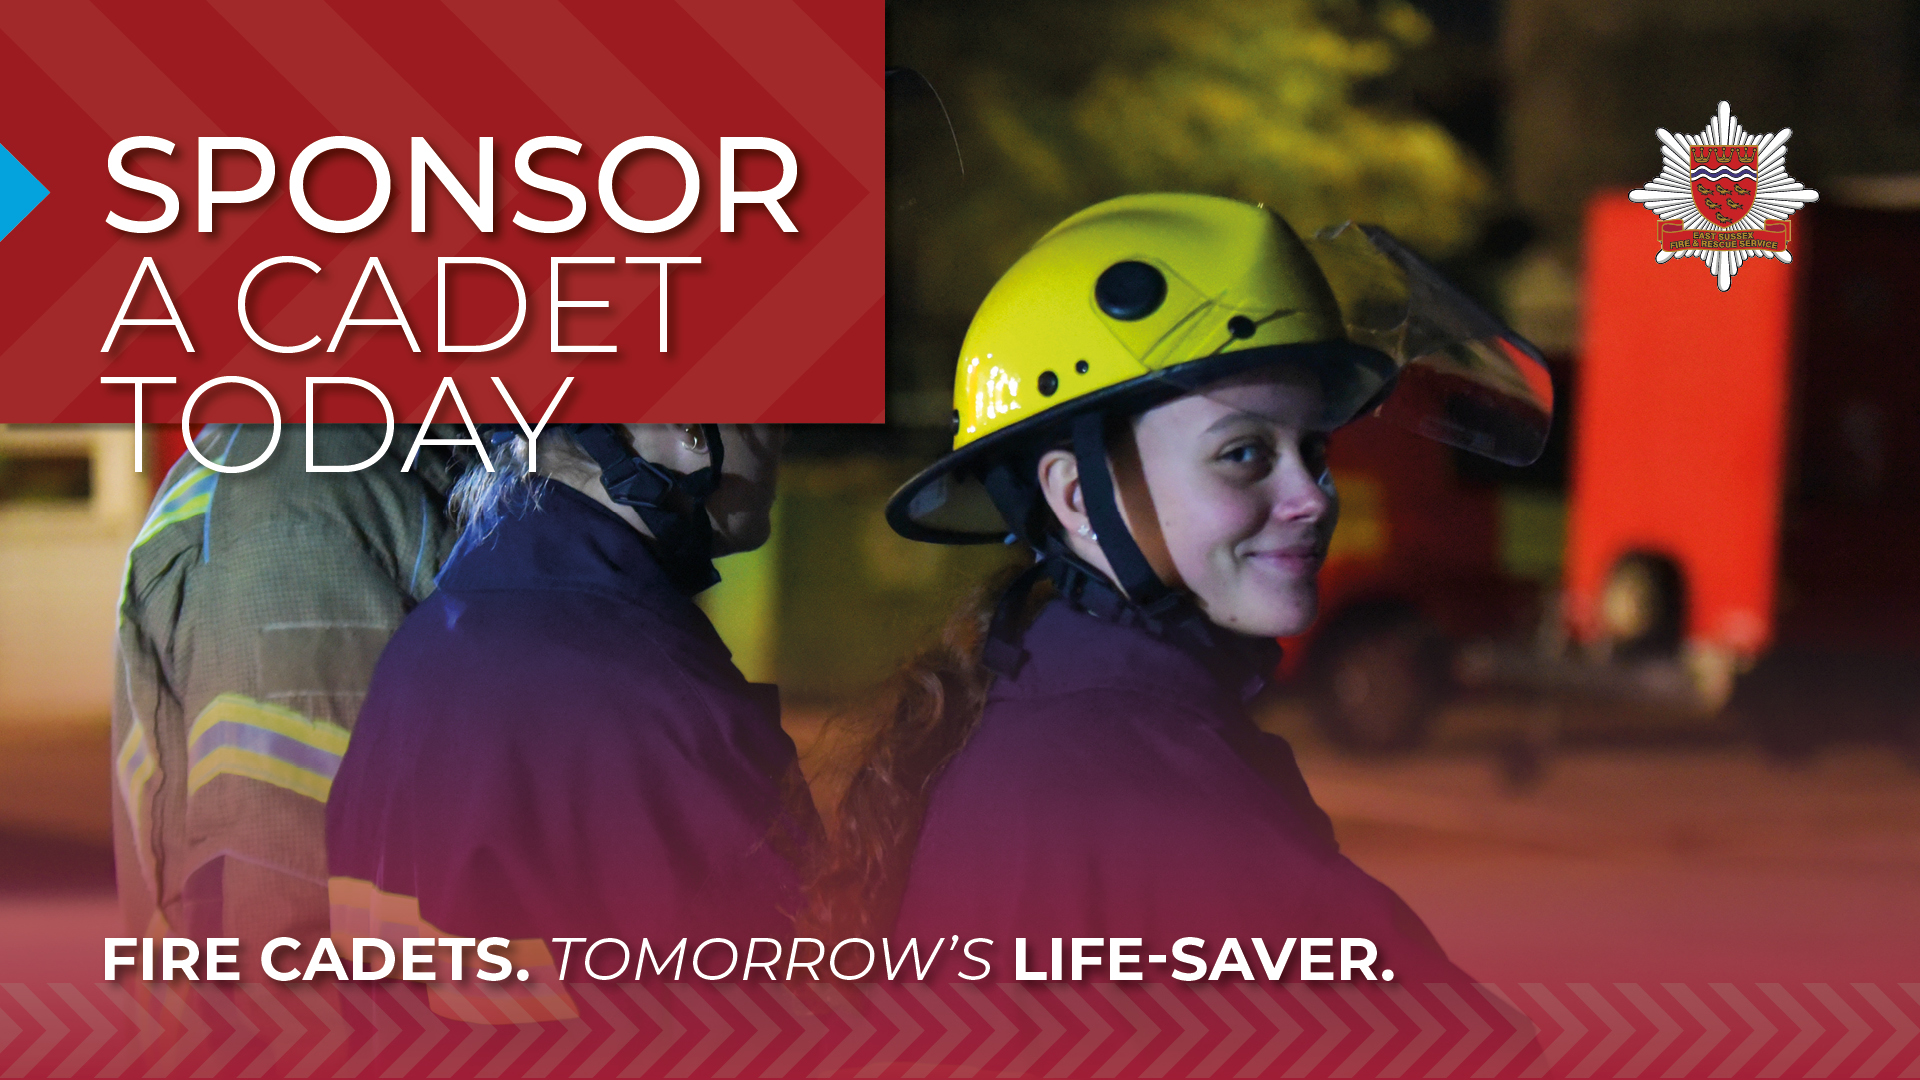 Find out more about how you could sponsor our cadets.